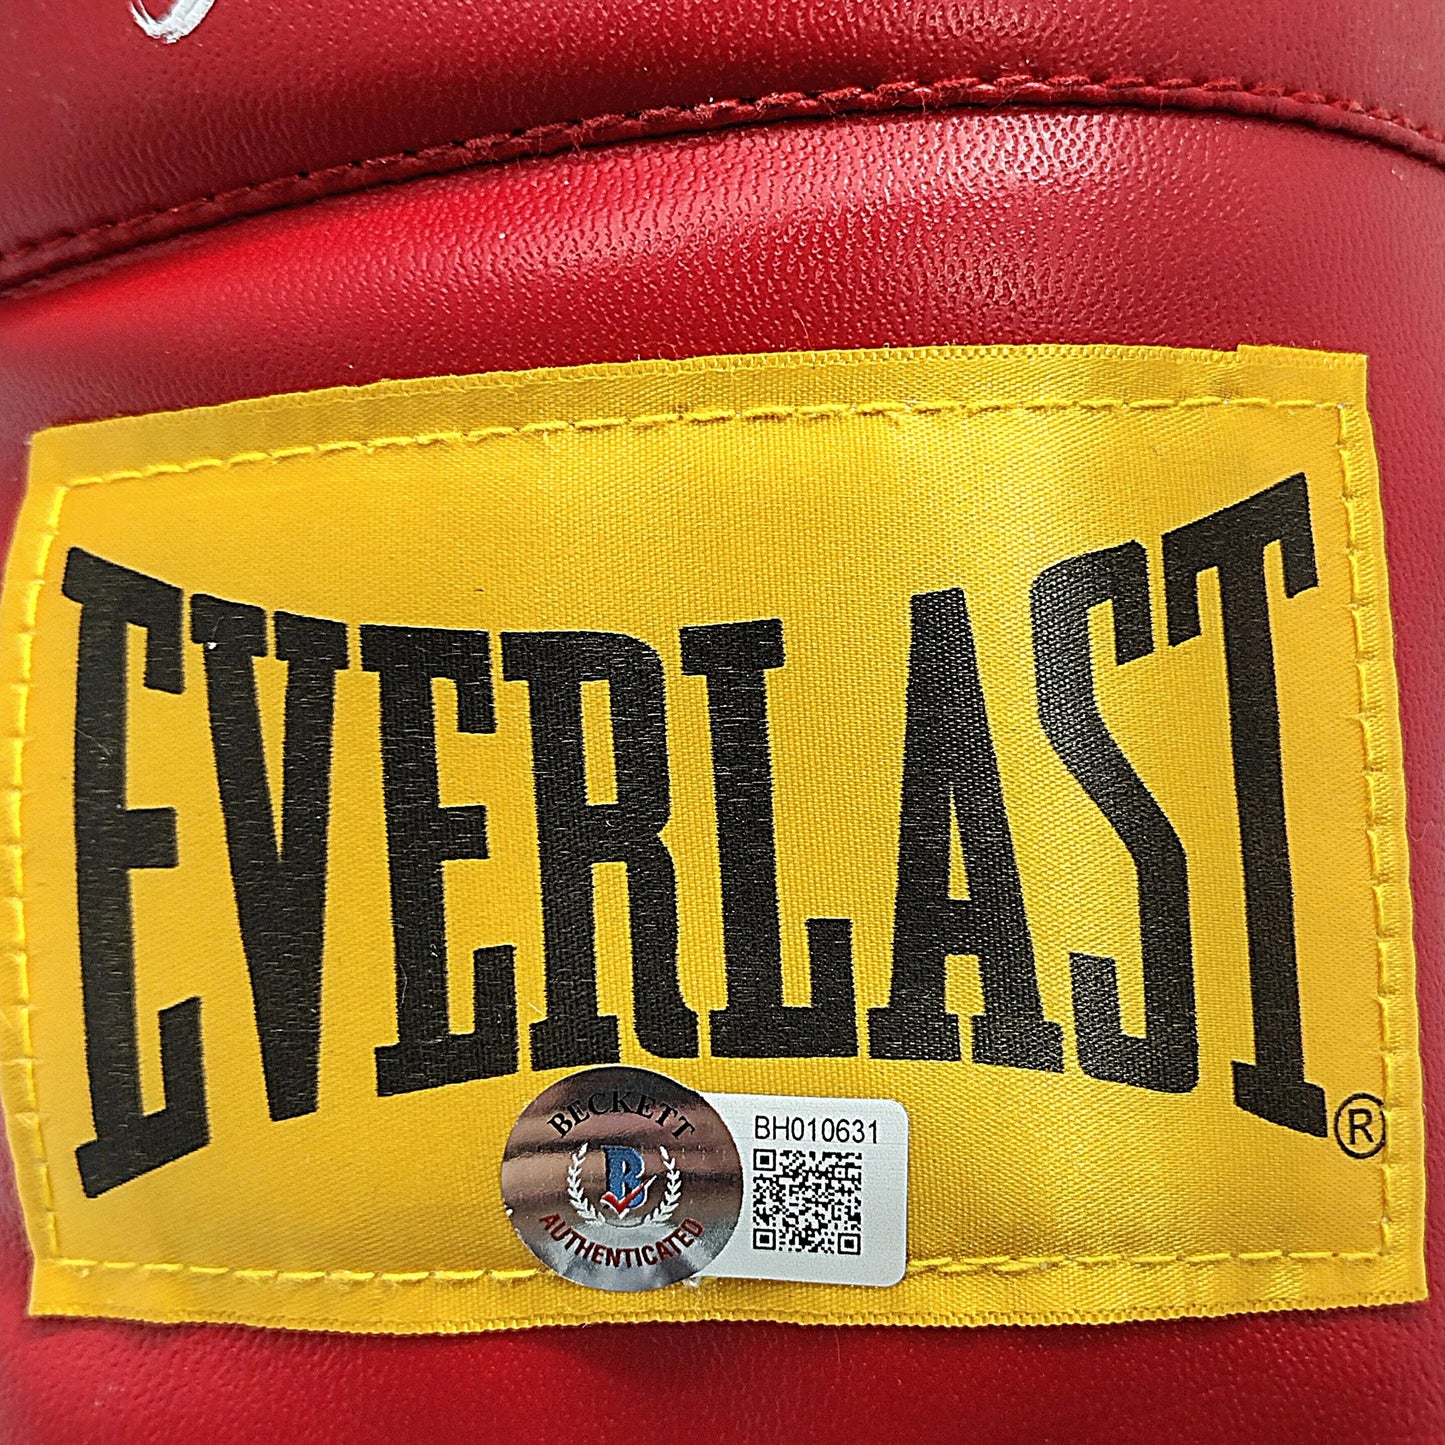 Boxing Gloves- Autographed- Shawn Porter Signed Red Everlast Boxing Glove Silver Signature Proof Photo Beckett Authentication 304